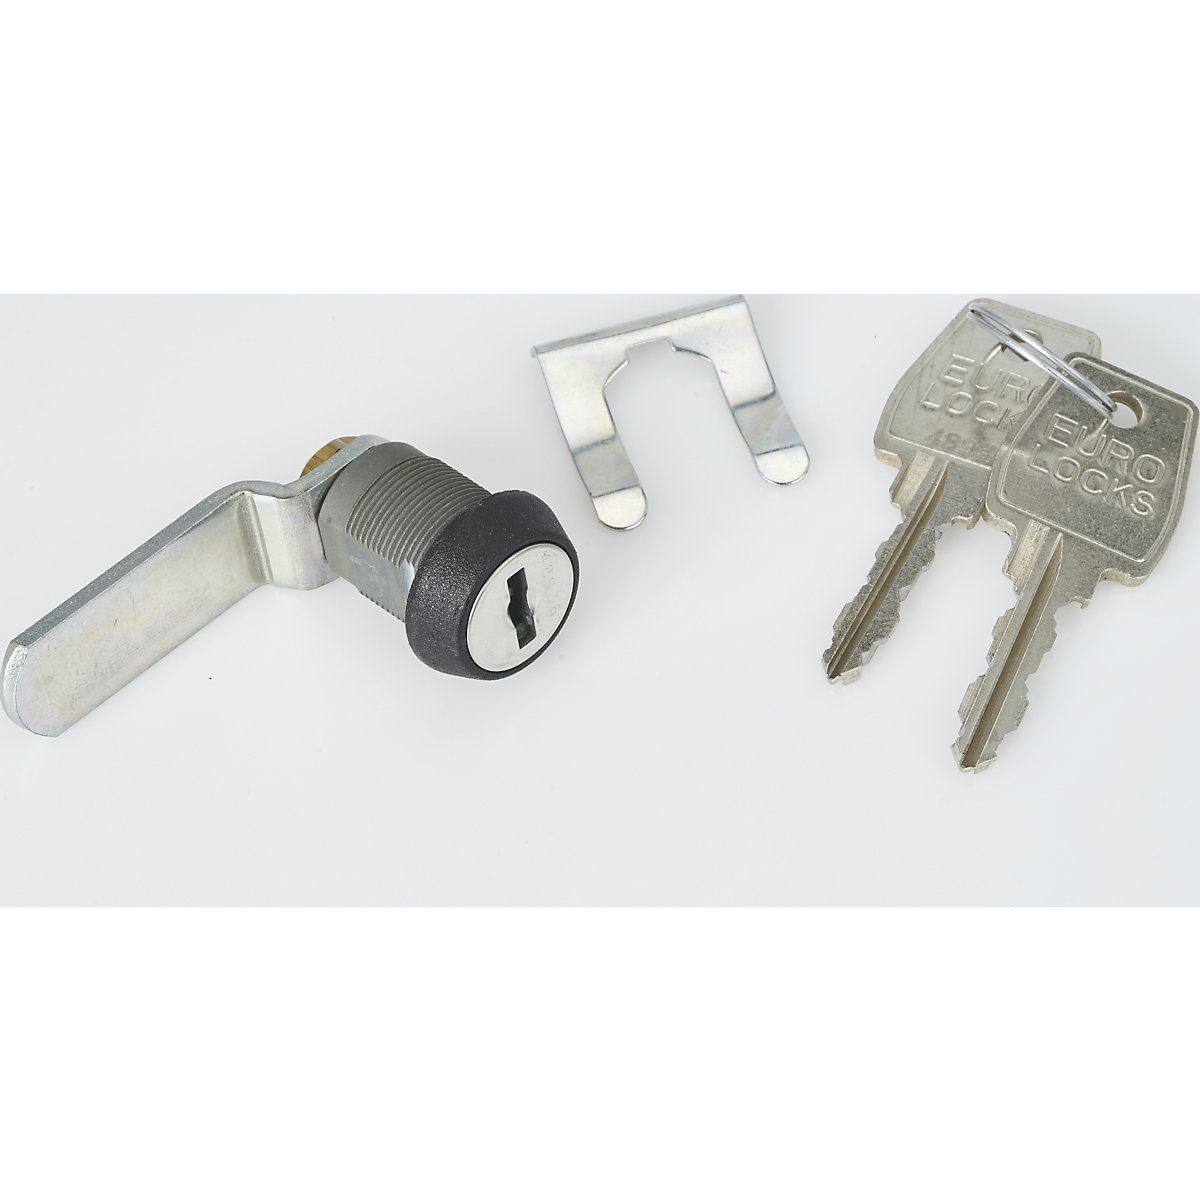 Replacement cylinder lock